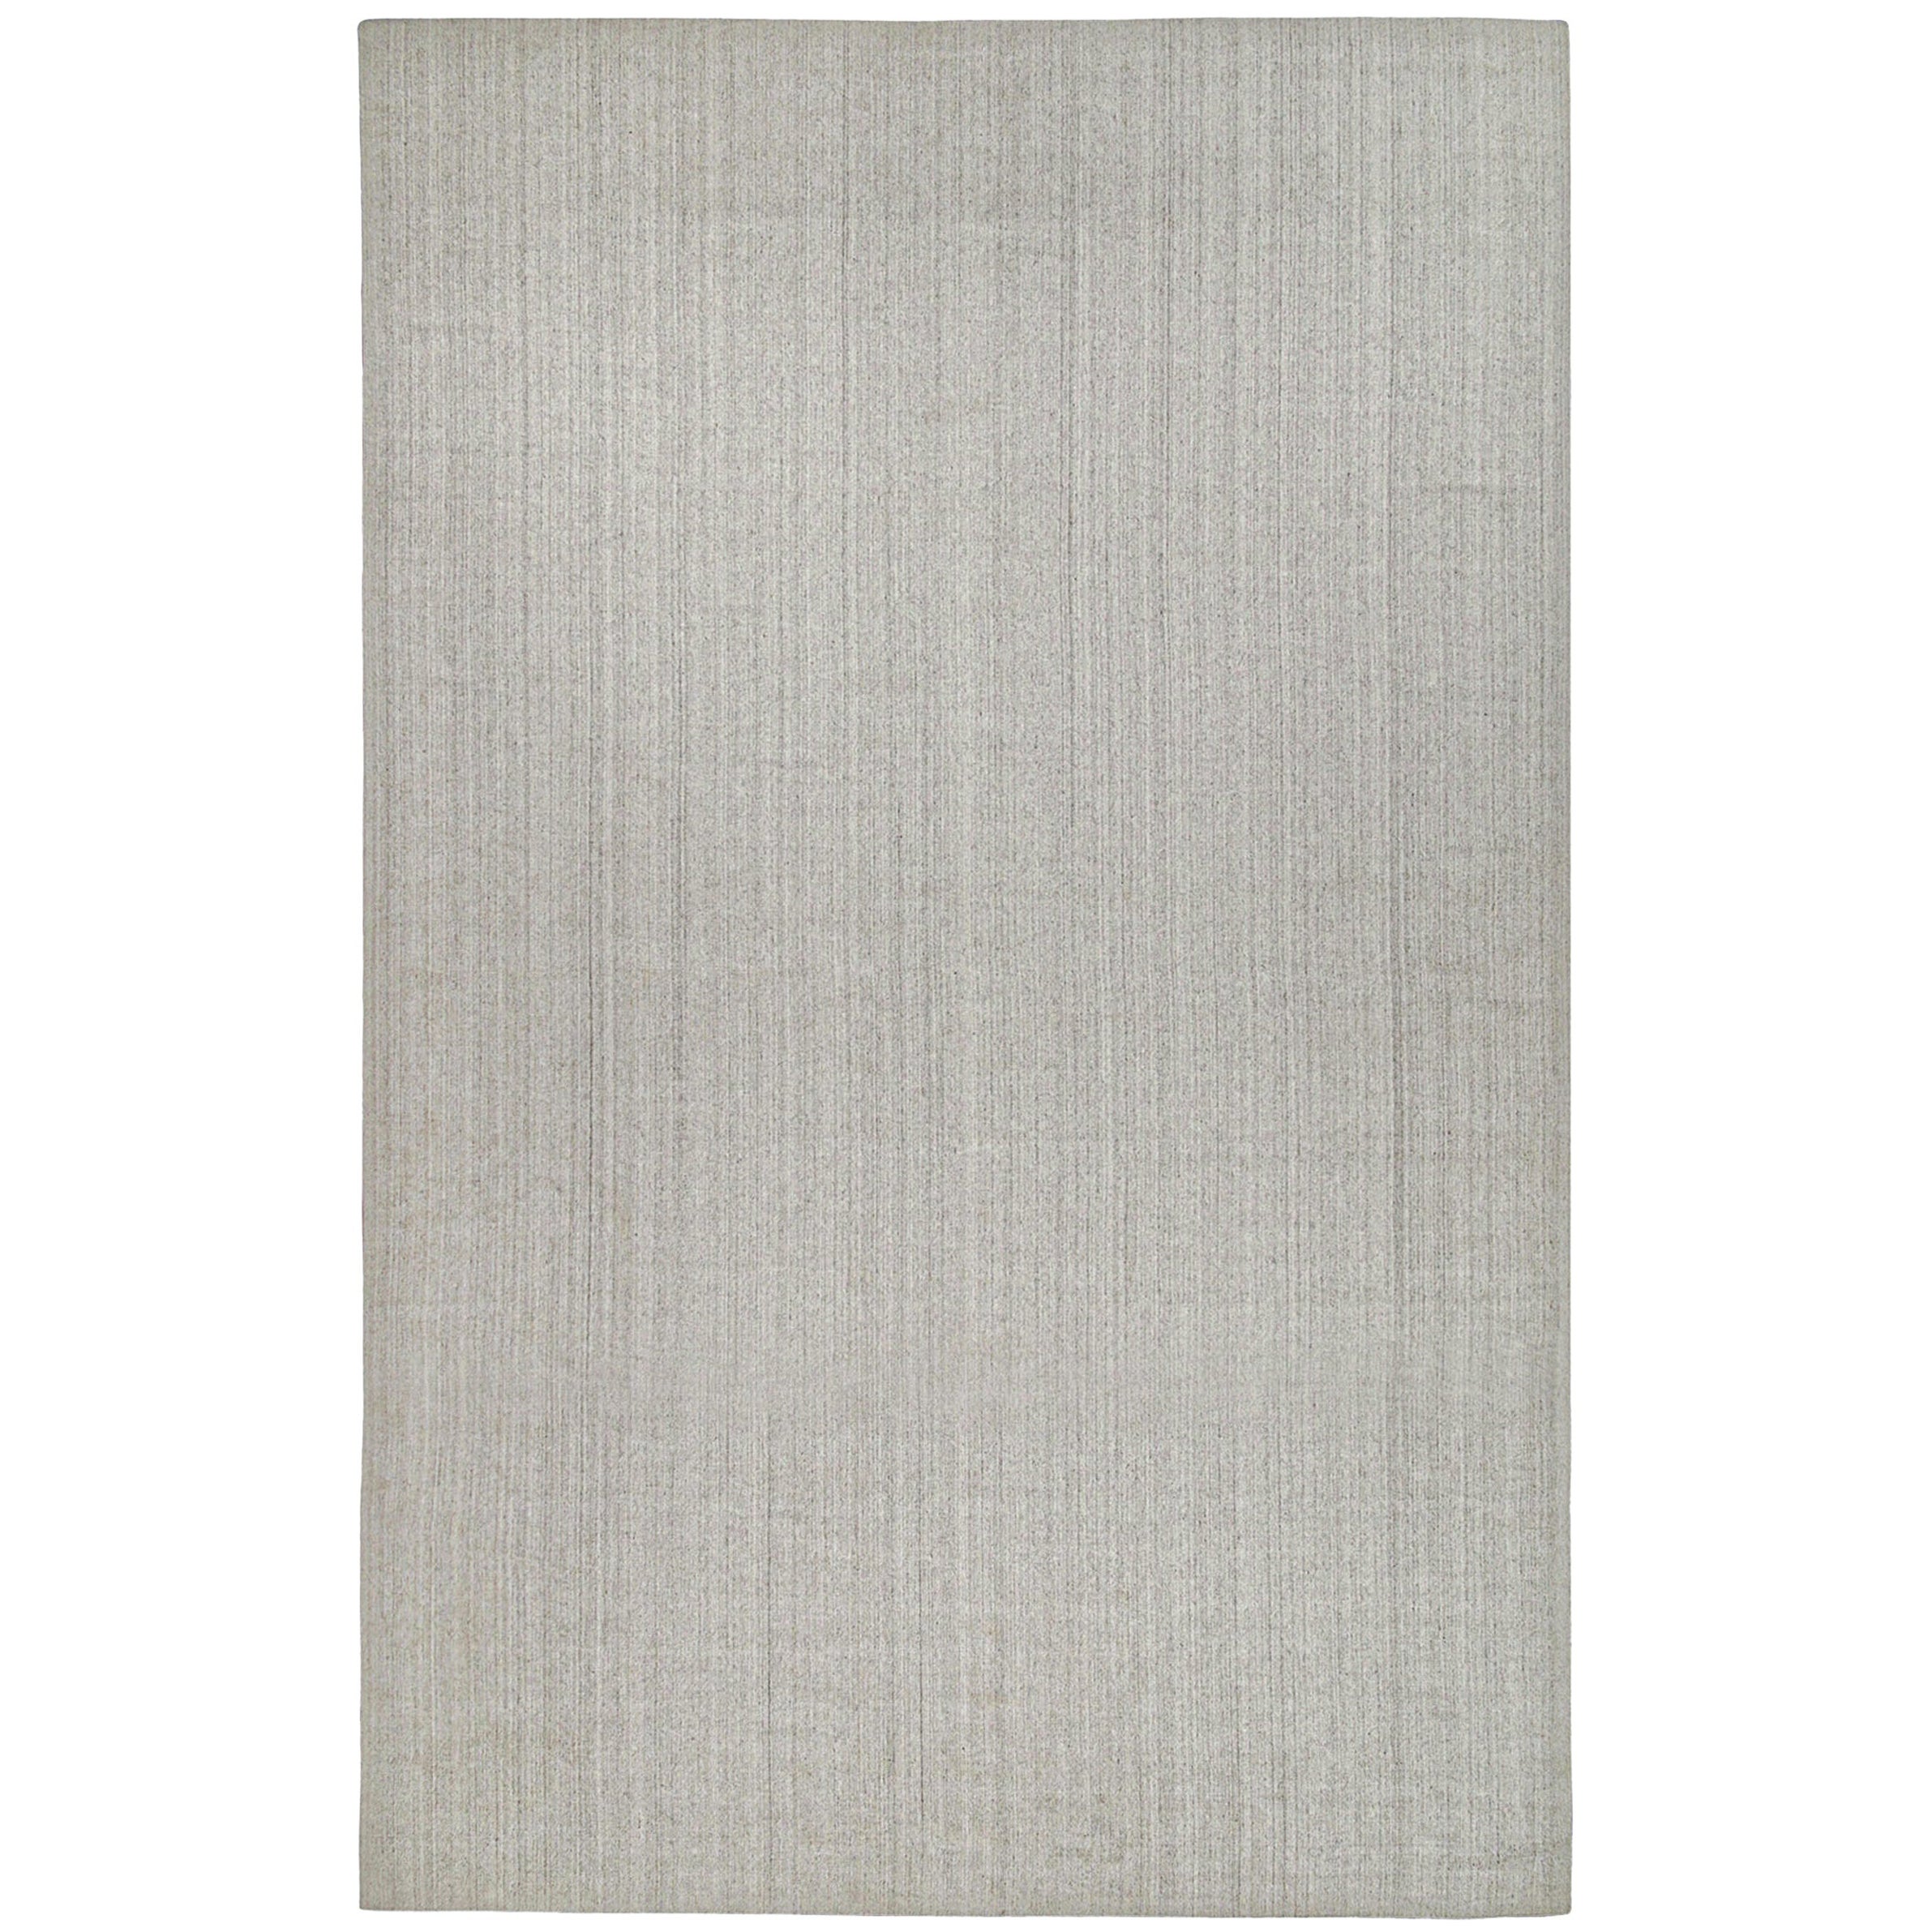 Rug & Kilim's Modern Rug in Solid Gray and Off-White Striae (tapis moderne en gris uni et rayures blanc cassé)